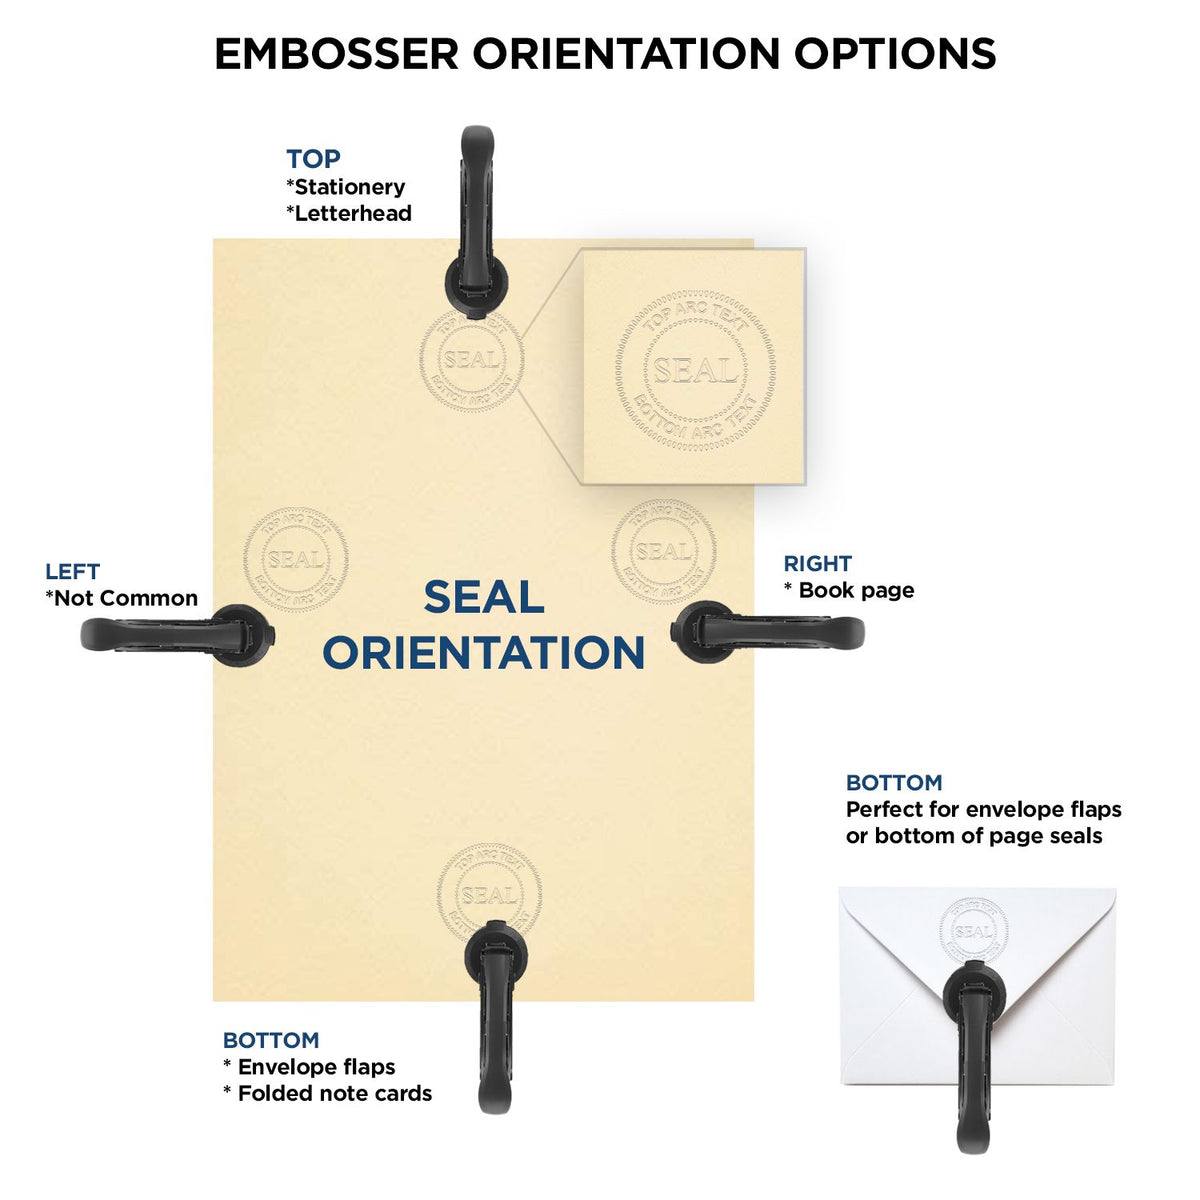 An infographic for the Hybrid Maine Land Surveyor Seal showing embosser orientation, this is showing examples of a top, bottom, right and left insert.